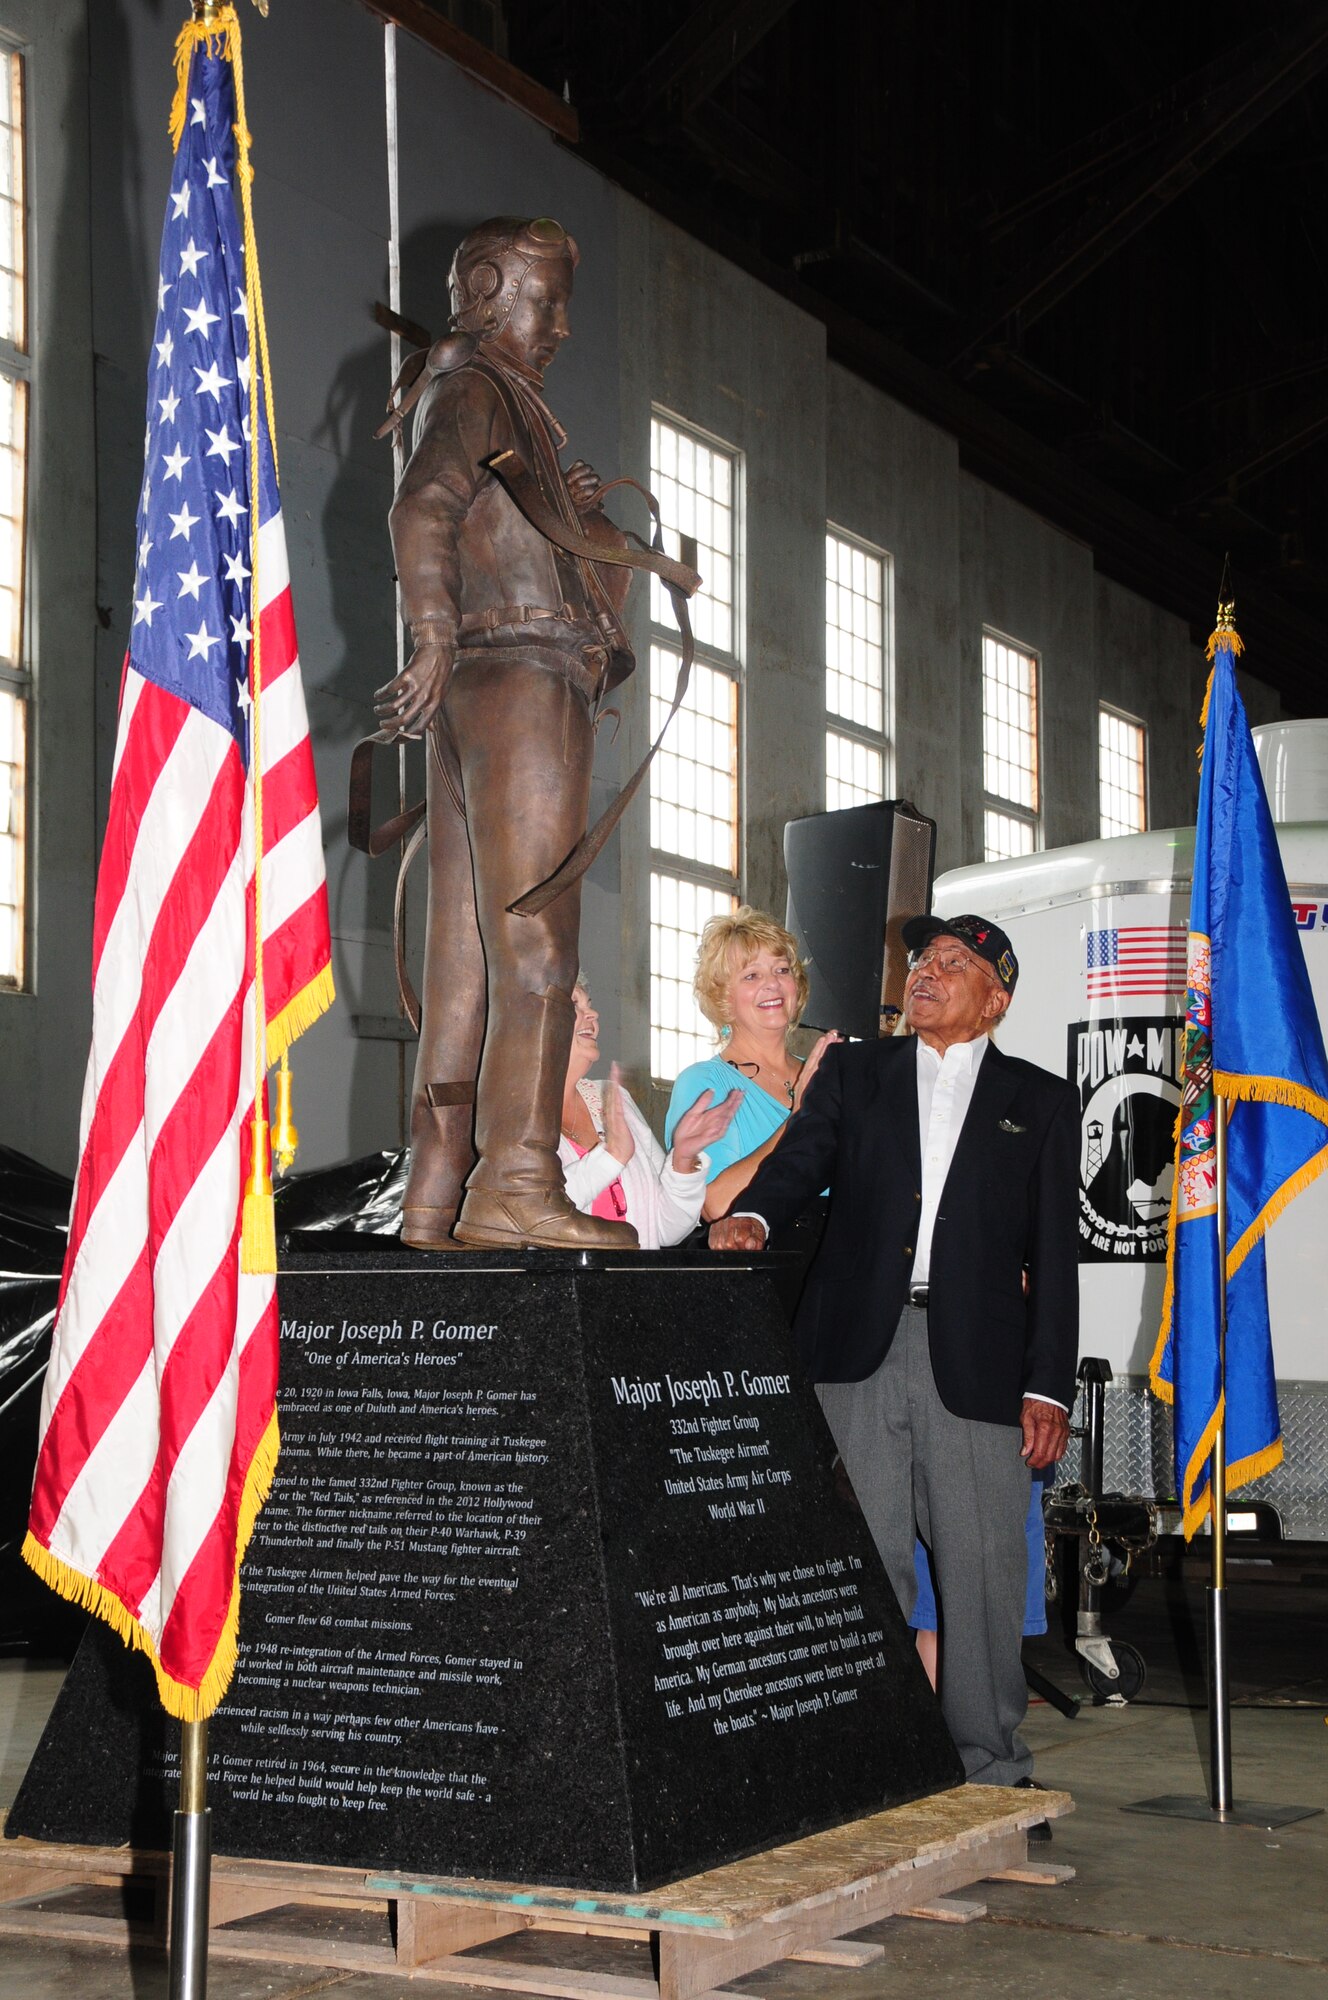 Maj. (Ret.) Joe Gomer, a Tuskegee Airman and Duluth native, looks at the
statue dedicated to his service in World War II during a ceremony at the
Commemorative Air Force hangar, Duluth, Minn. June 23, 2012. (National Guard
photo by Staff Sgt. Don L. Acton.)
